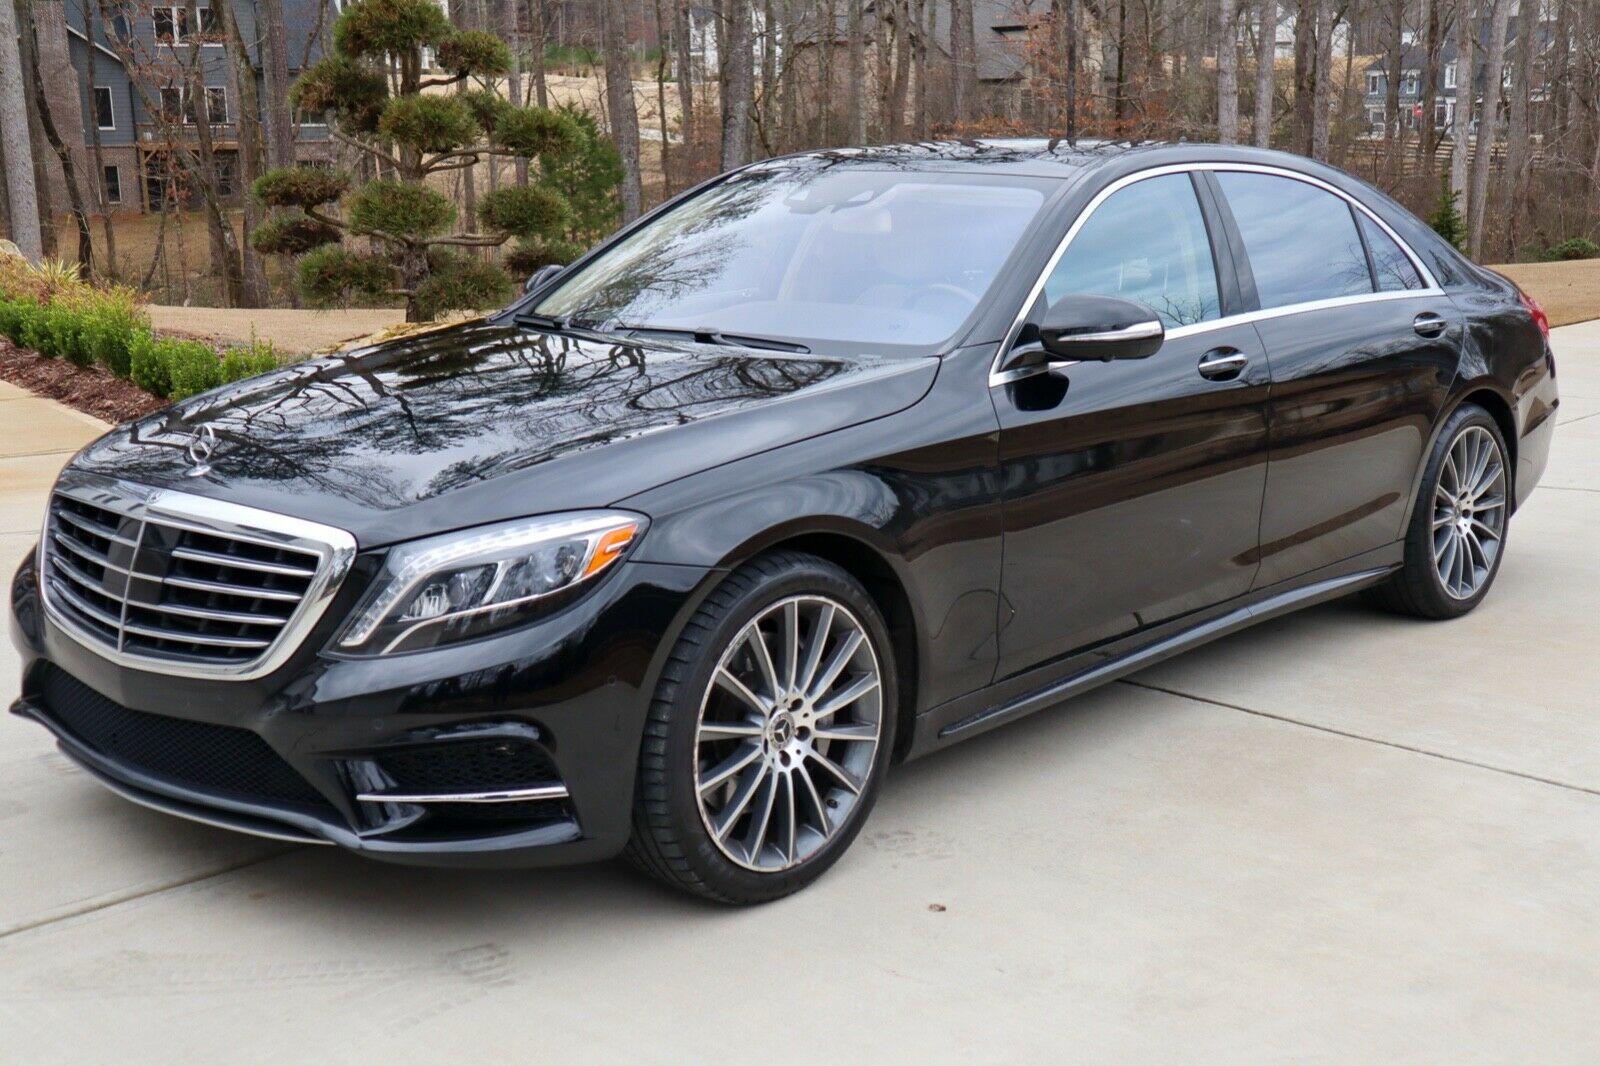 luxury sedan services for occasions